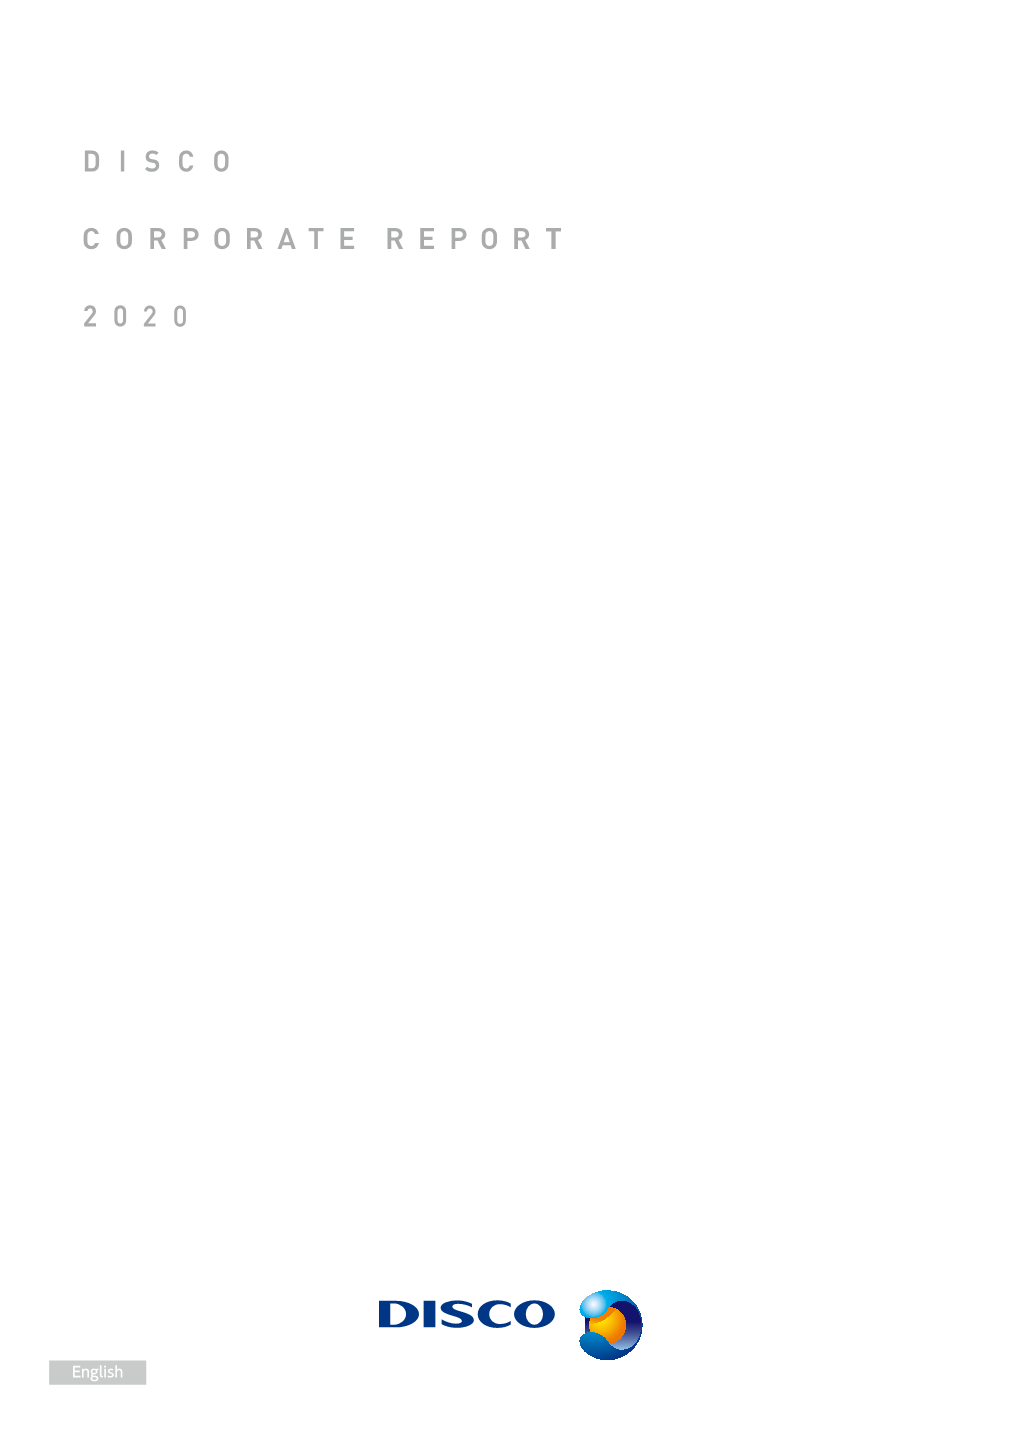 Corporate Report Click Here for the DISCO